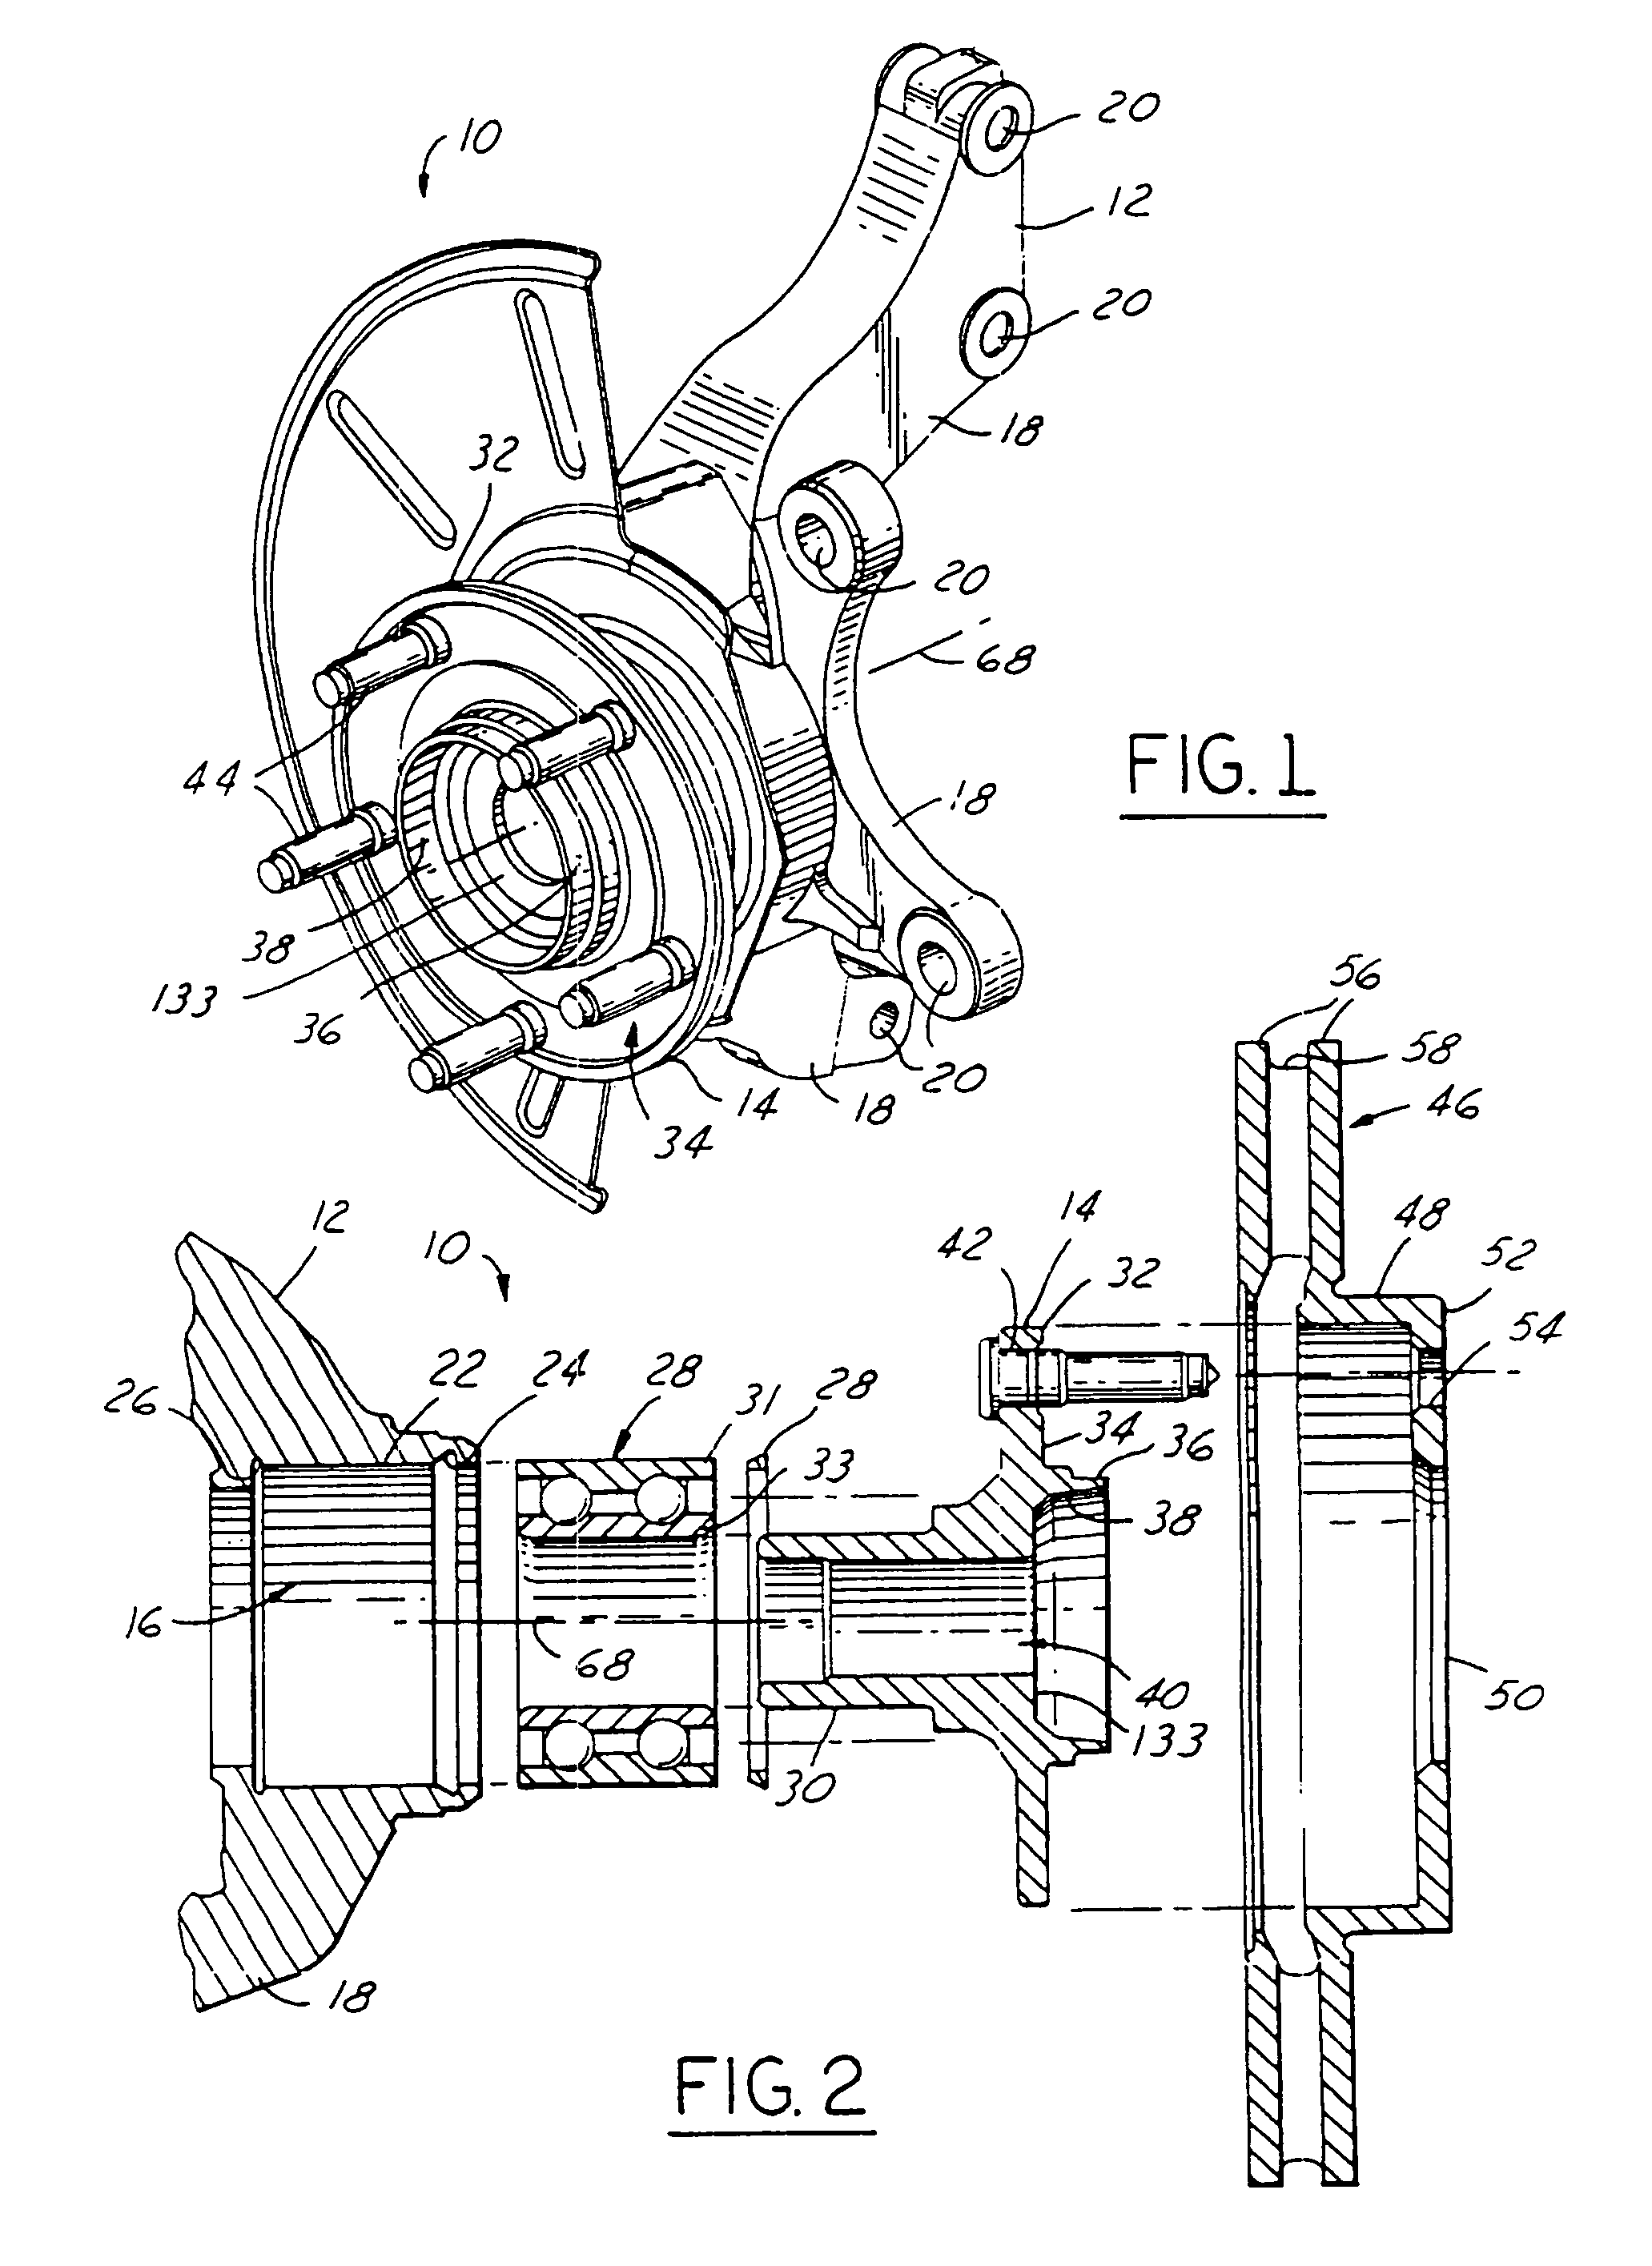 Knuckle hub assembly and method for making same